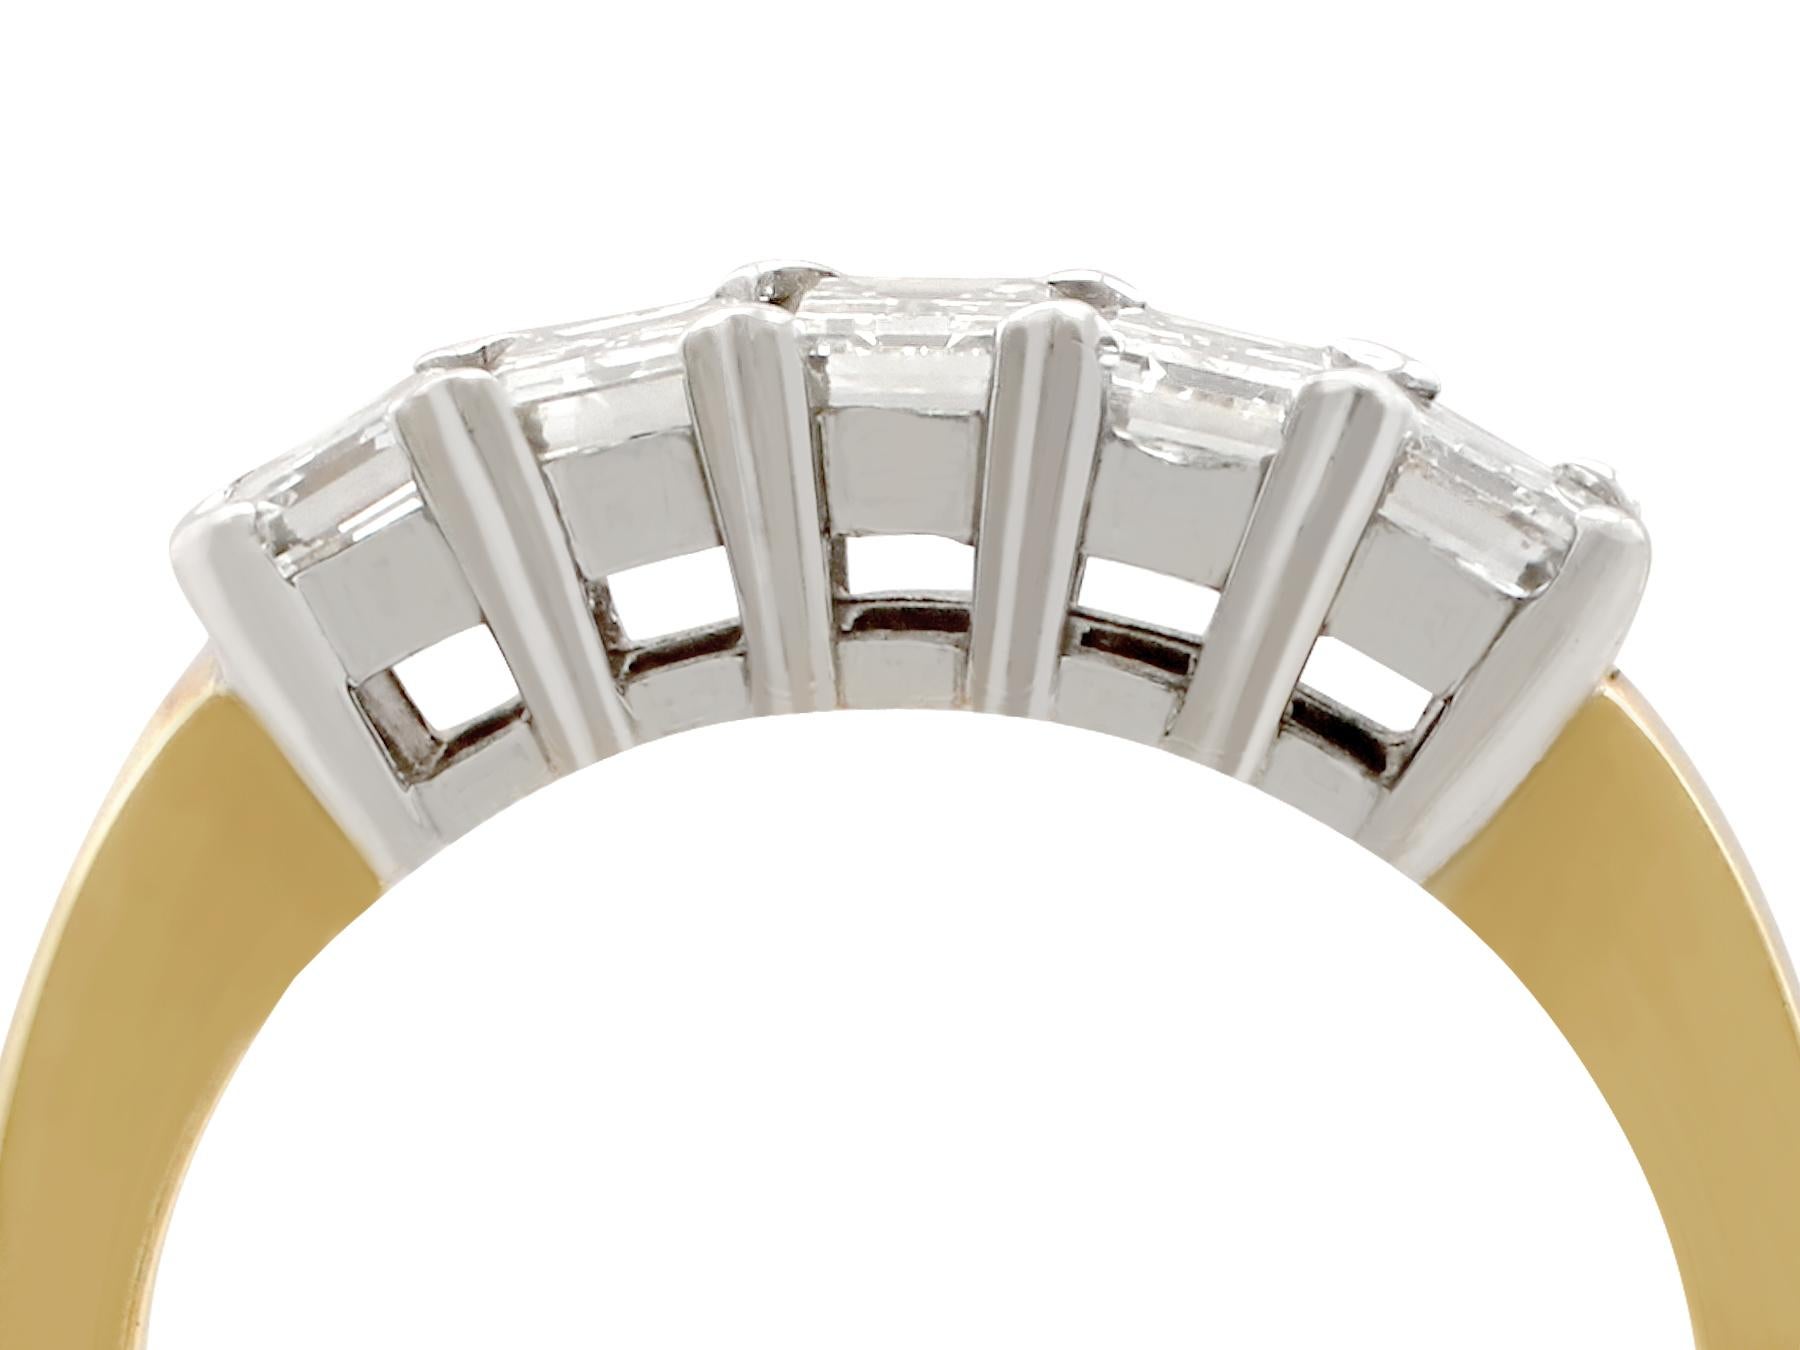 A contemporary 1.00 carat diamond, 18k yellow gold, 18k white gold set, five stone ring; part of our diverse range of diamond jewelry/jewelry

This contemporary five stone diamond ring has been crafted in 18k yellow gold, with an 18k white gold